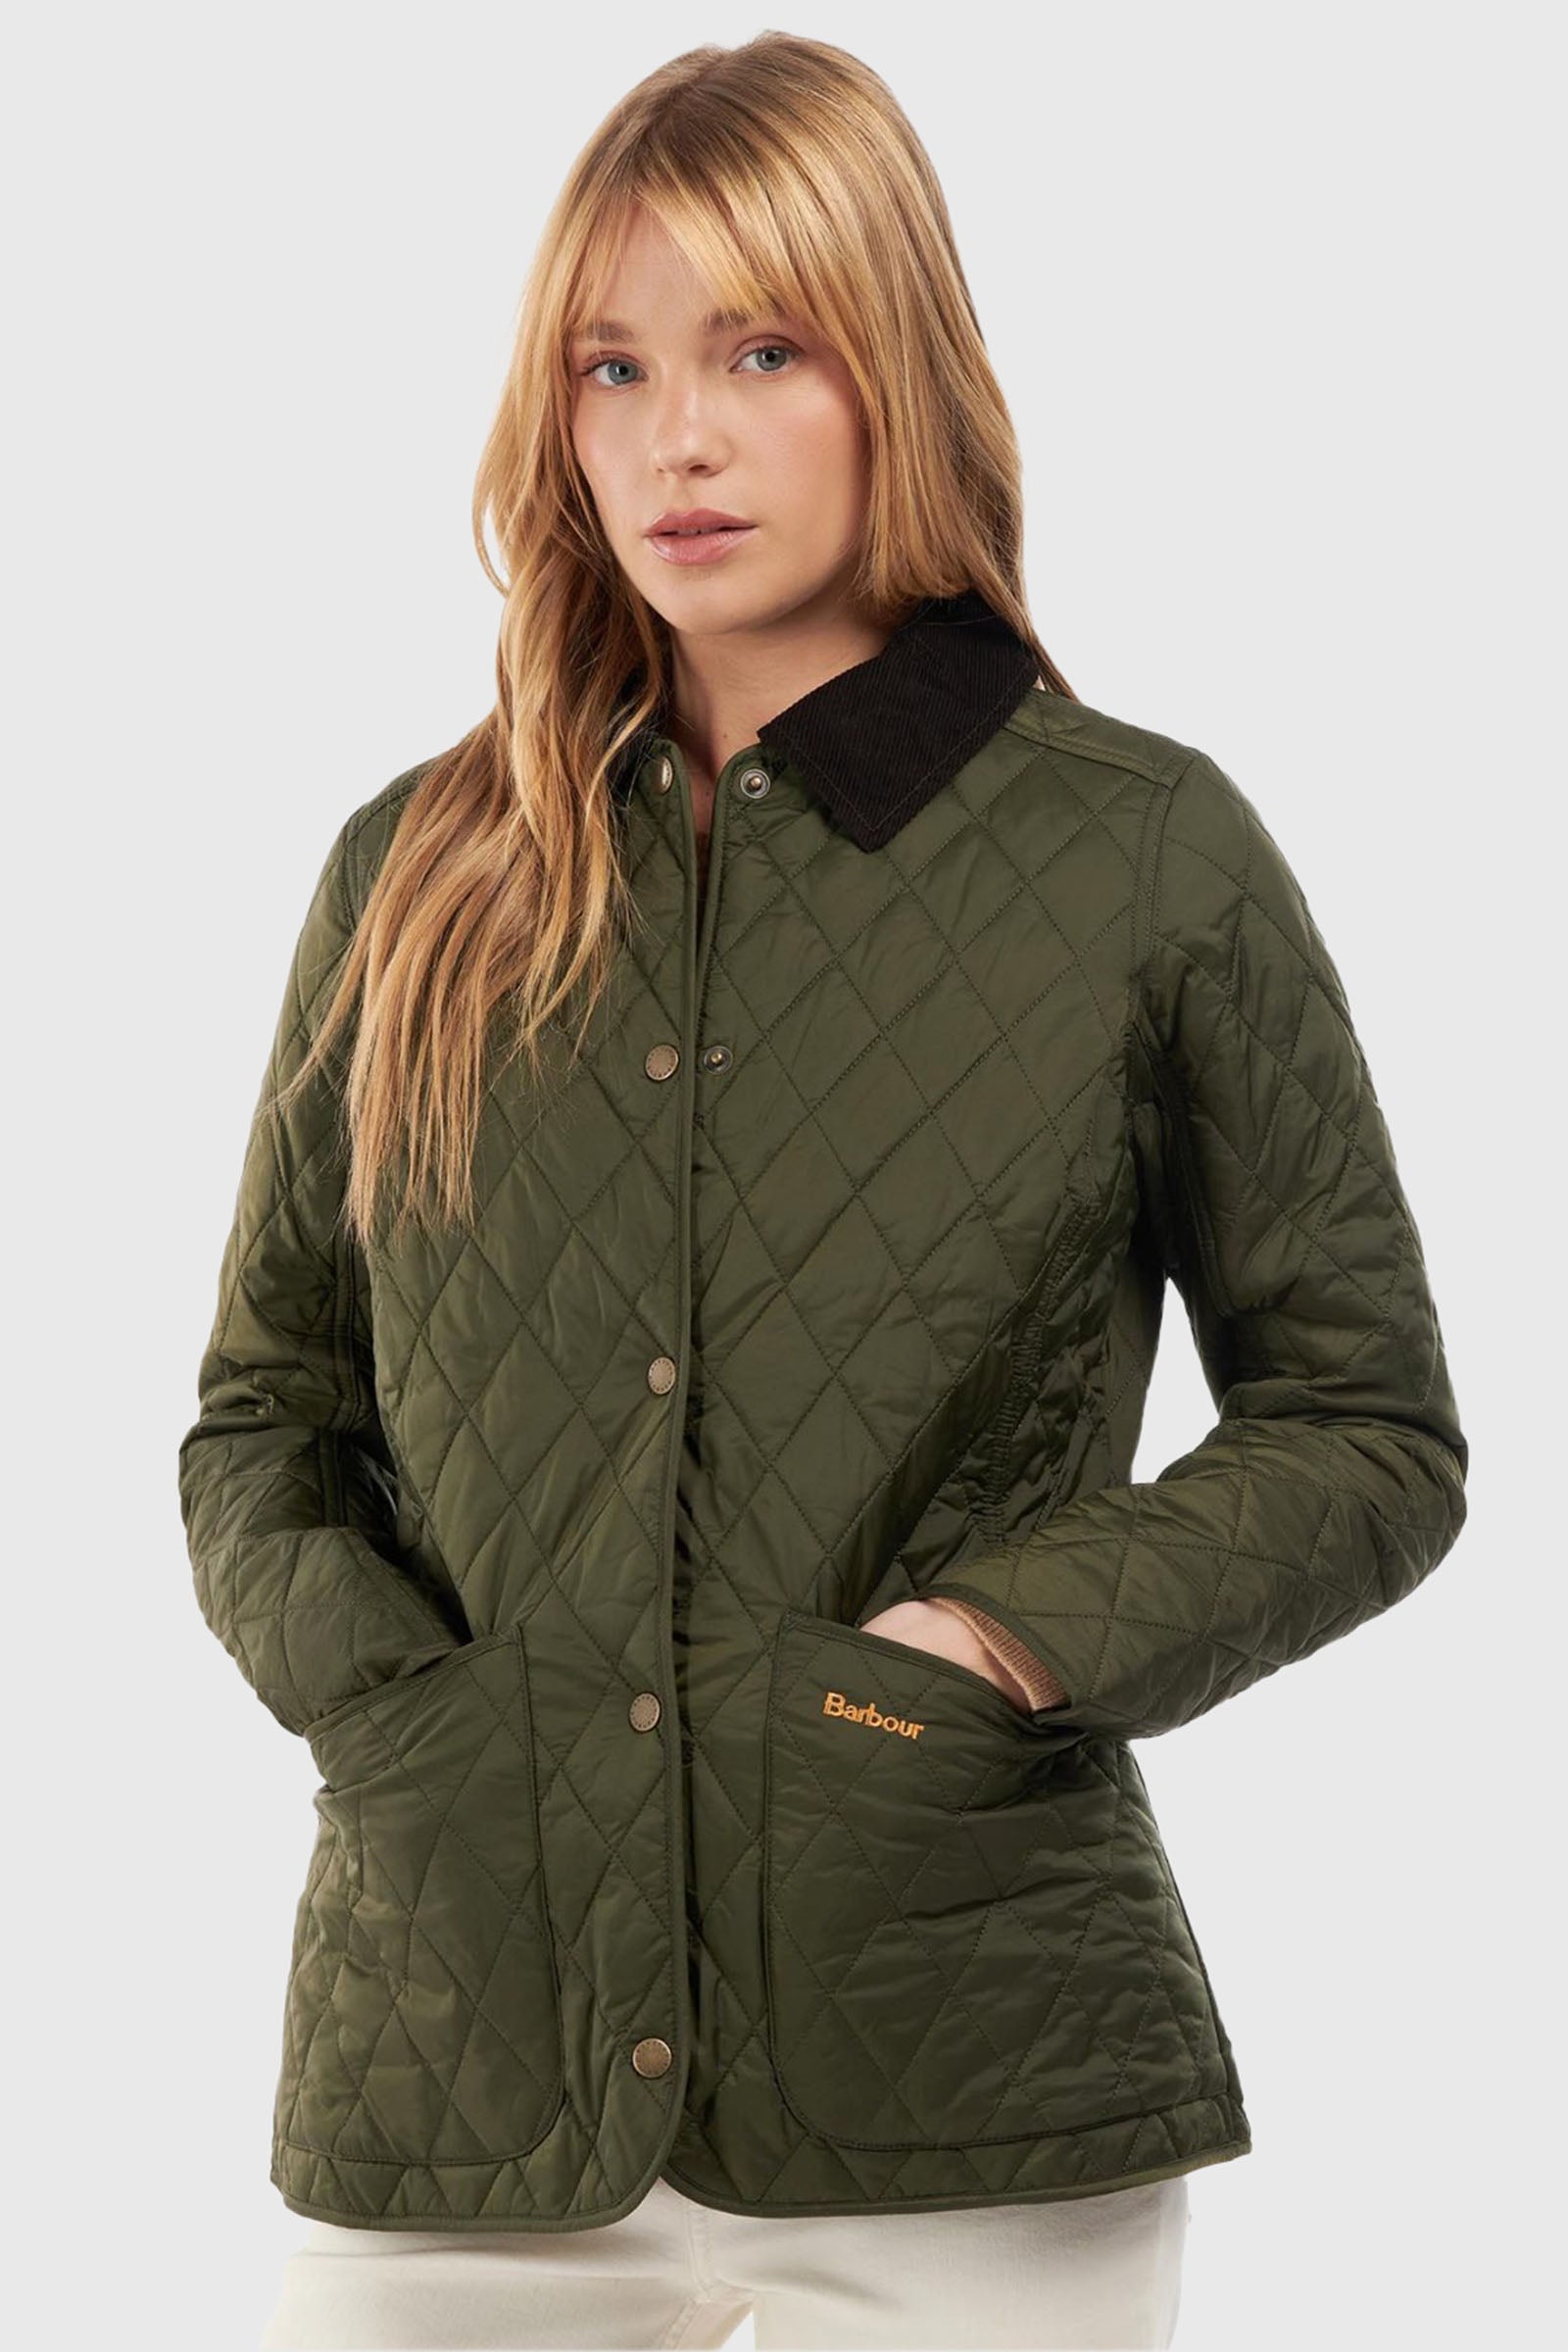 Barbour Annandale Quilted Jacket in Synthetic Olive Green - 1